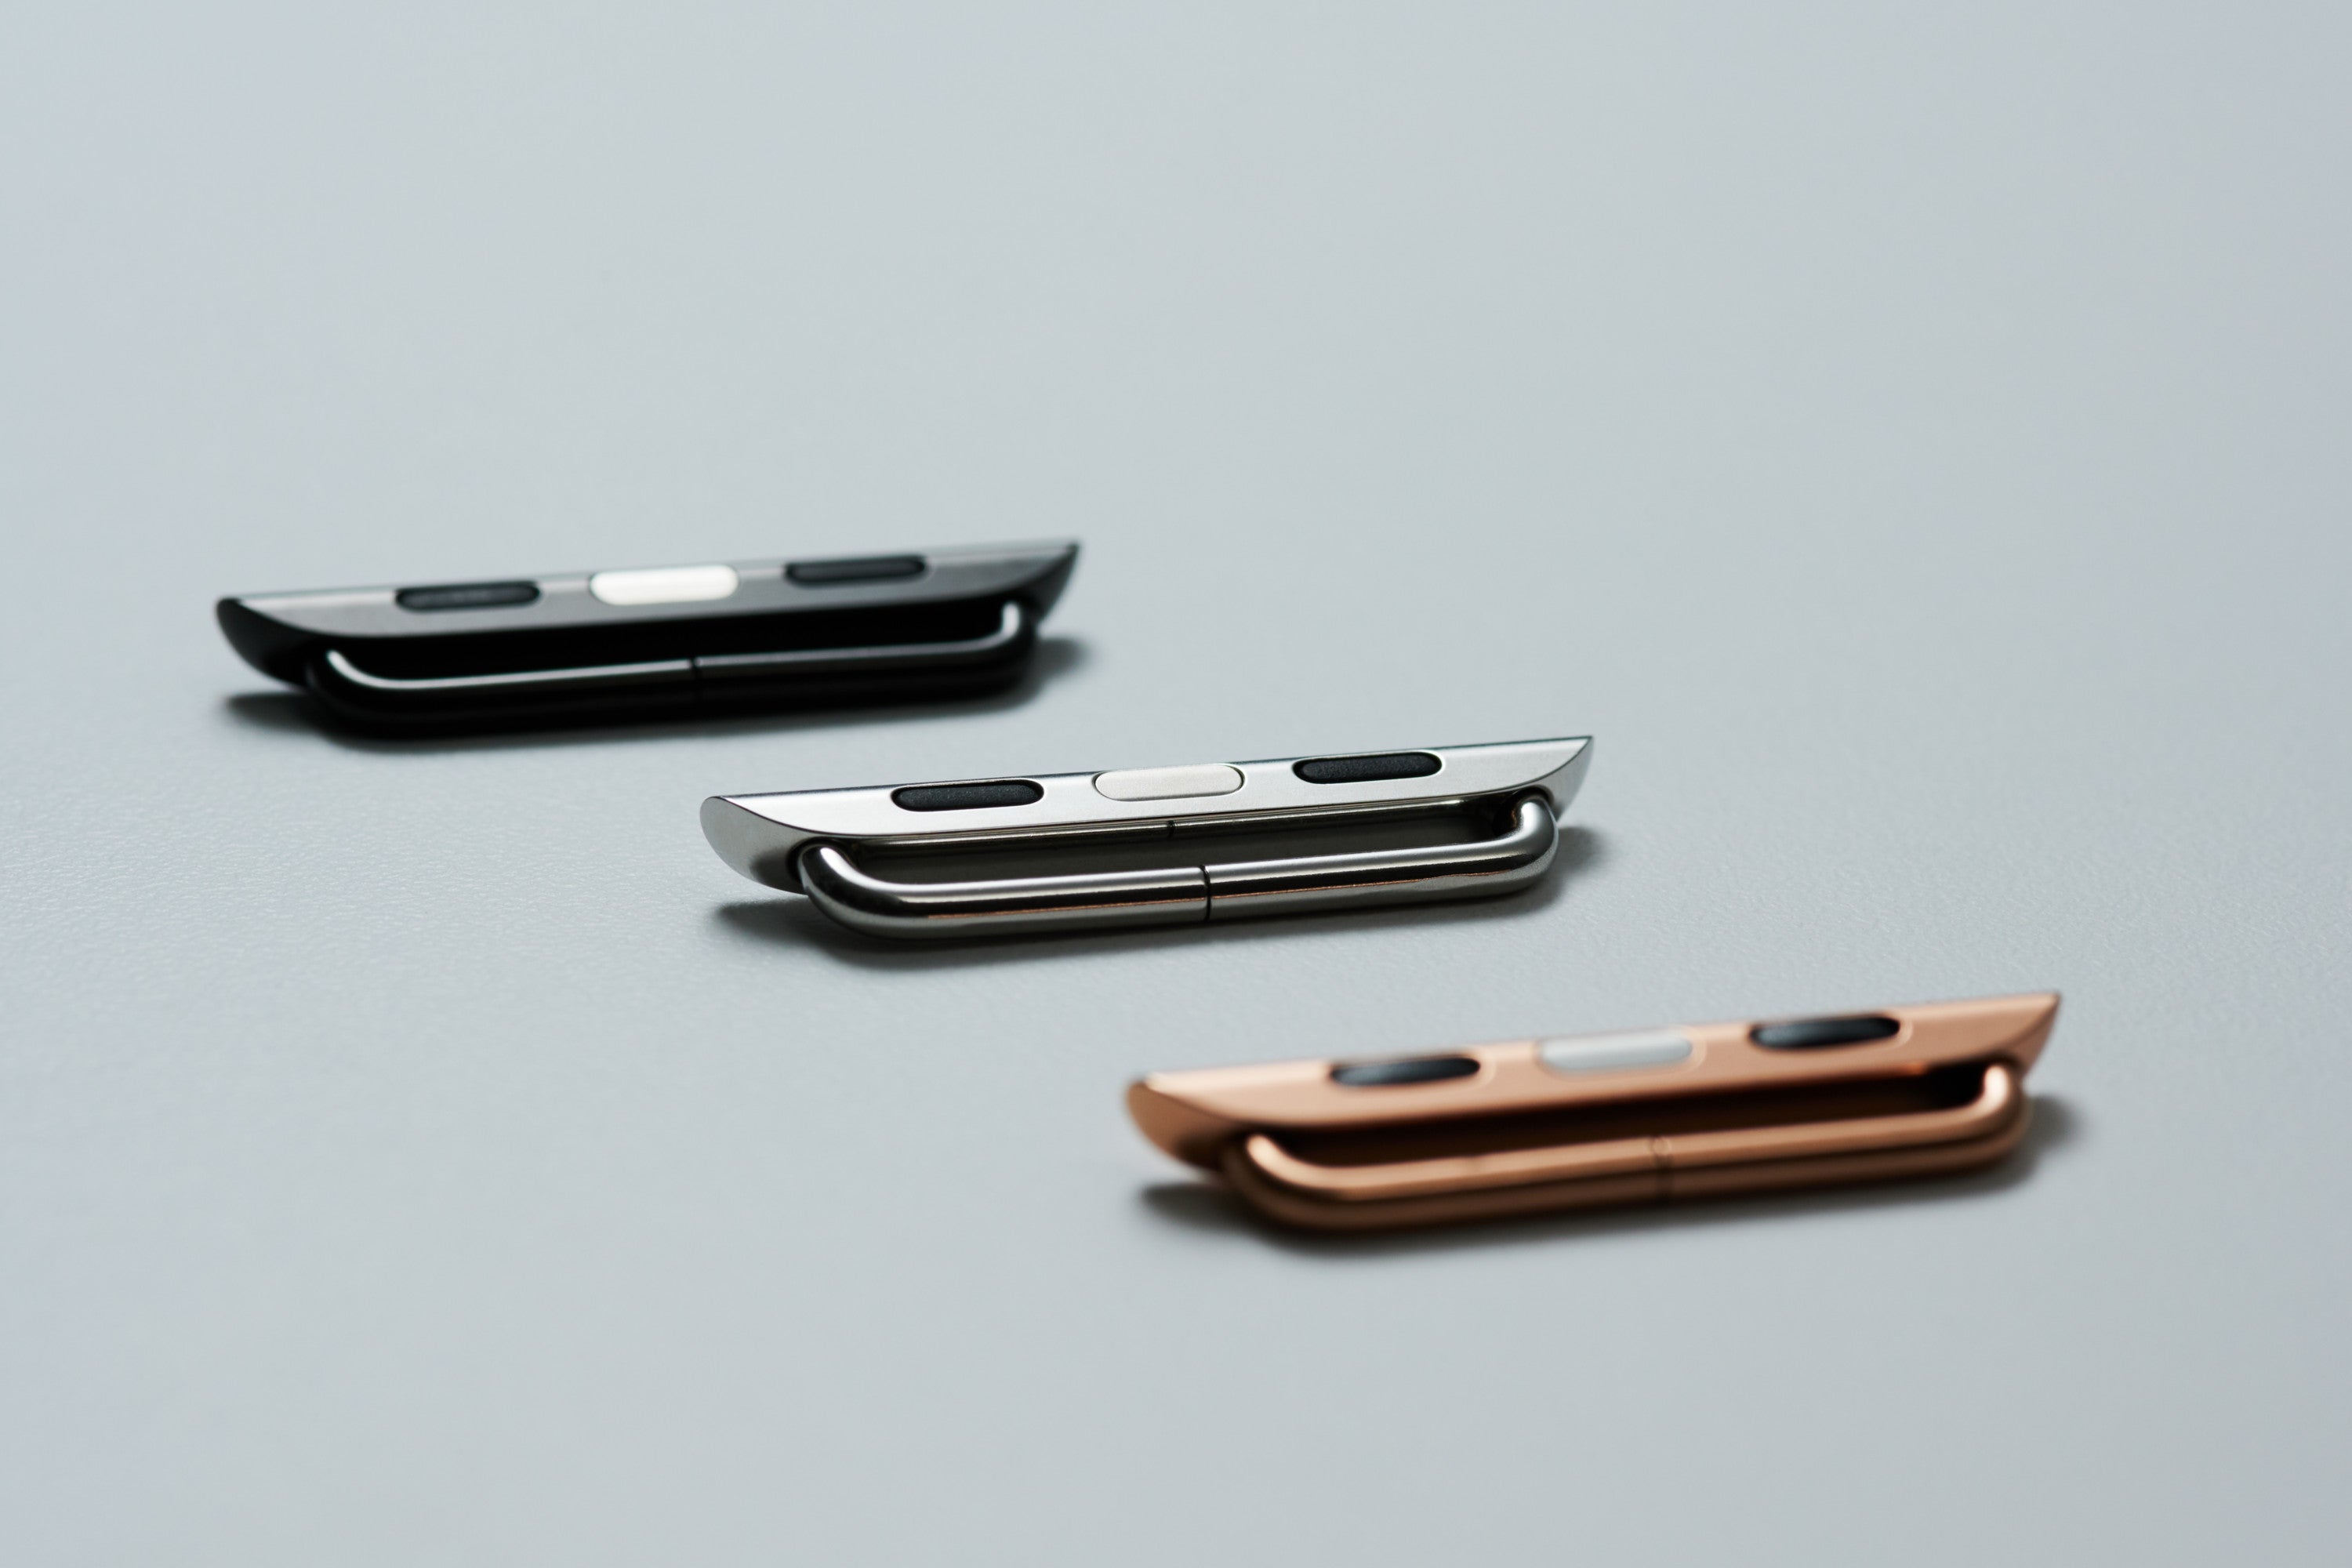 Leather Apple Watch Bands by Pin & Buckle - Polished Stainless Steel Adapters in Silver Gold and Black